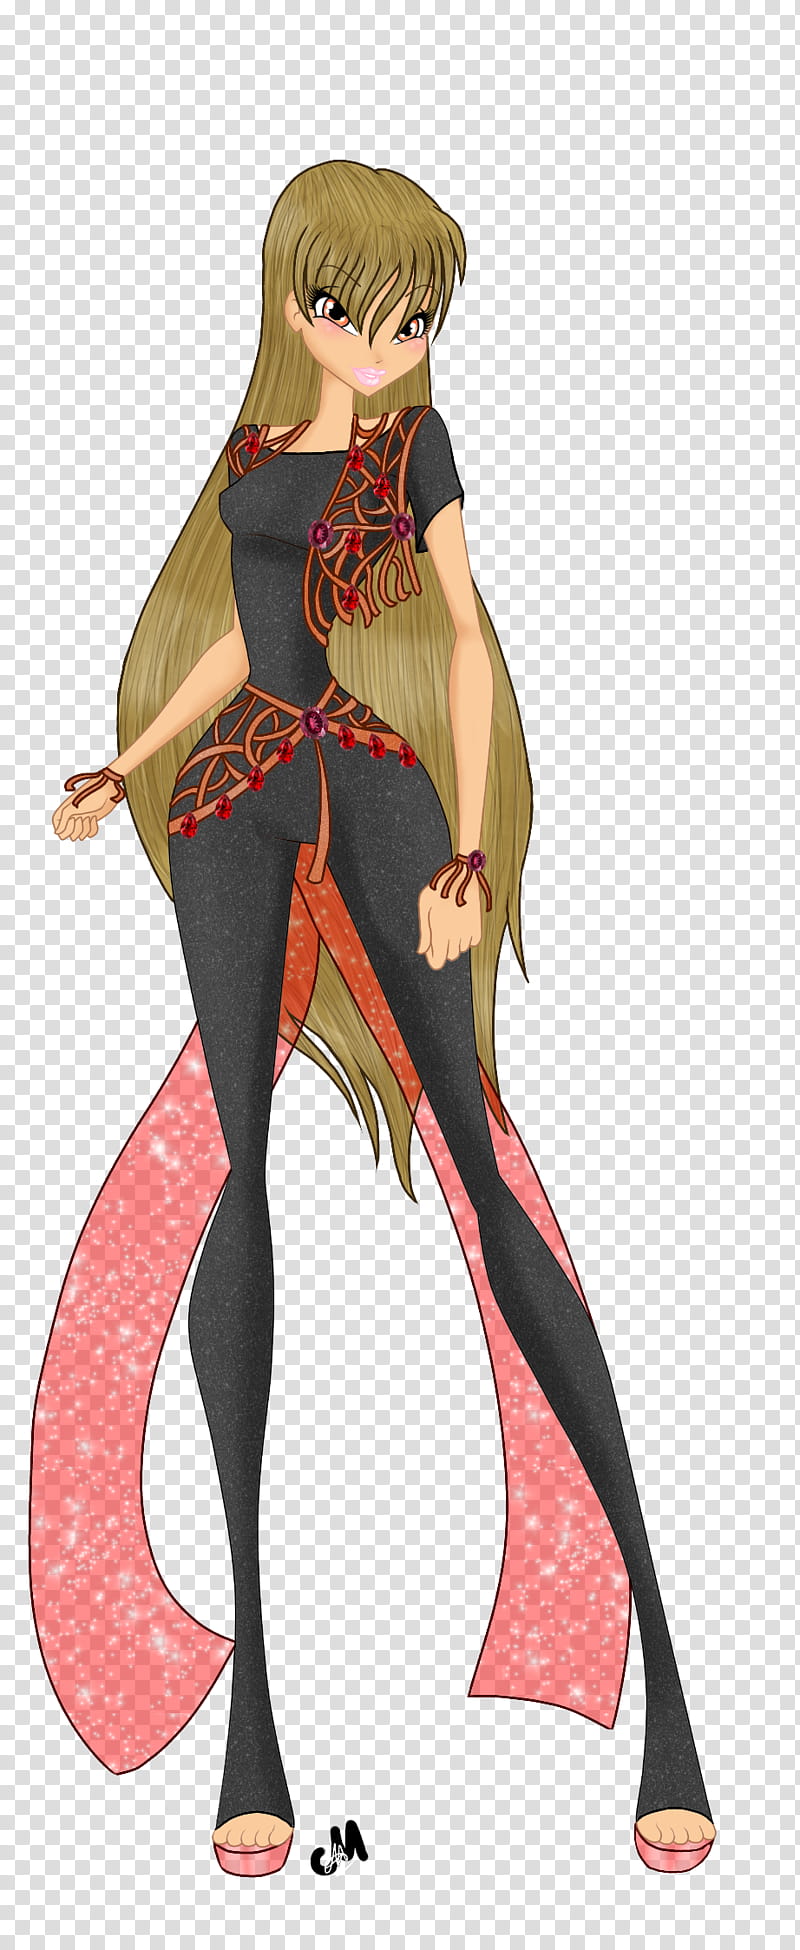 AT WOW Asuna DreamiX transparent background PNG clipart